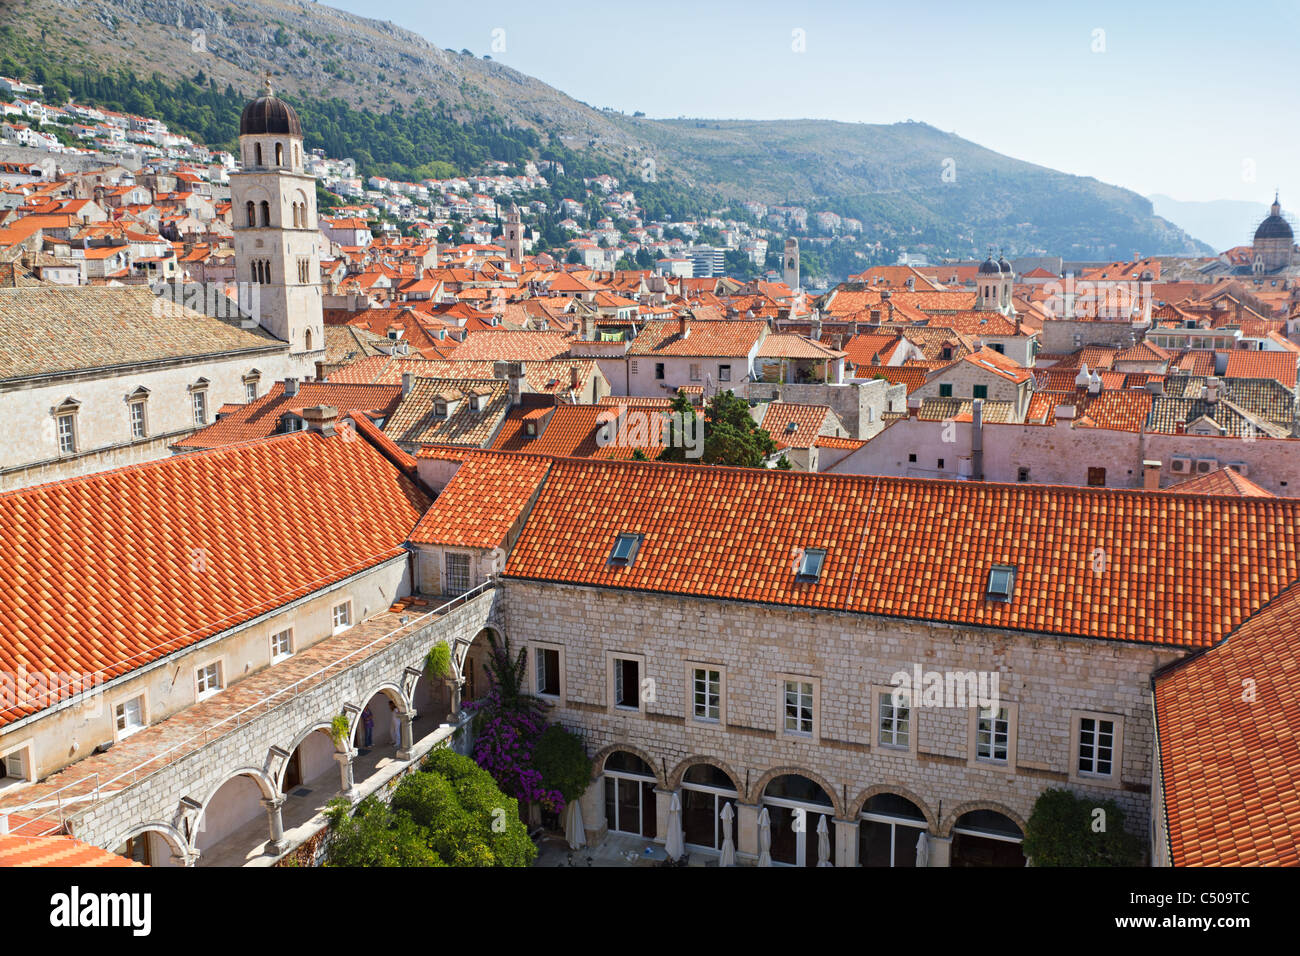 main court of old town Dubrovnik with many old red roofed windows, Croatia Stock Photo